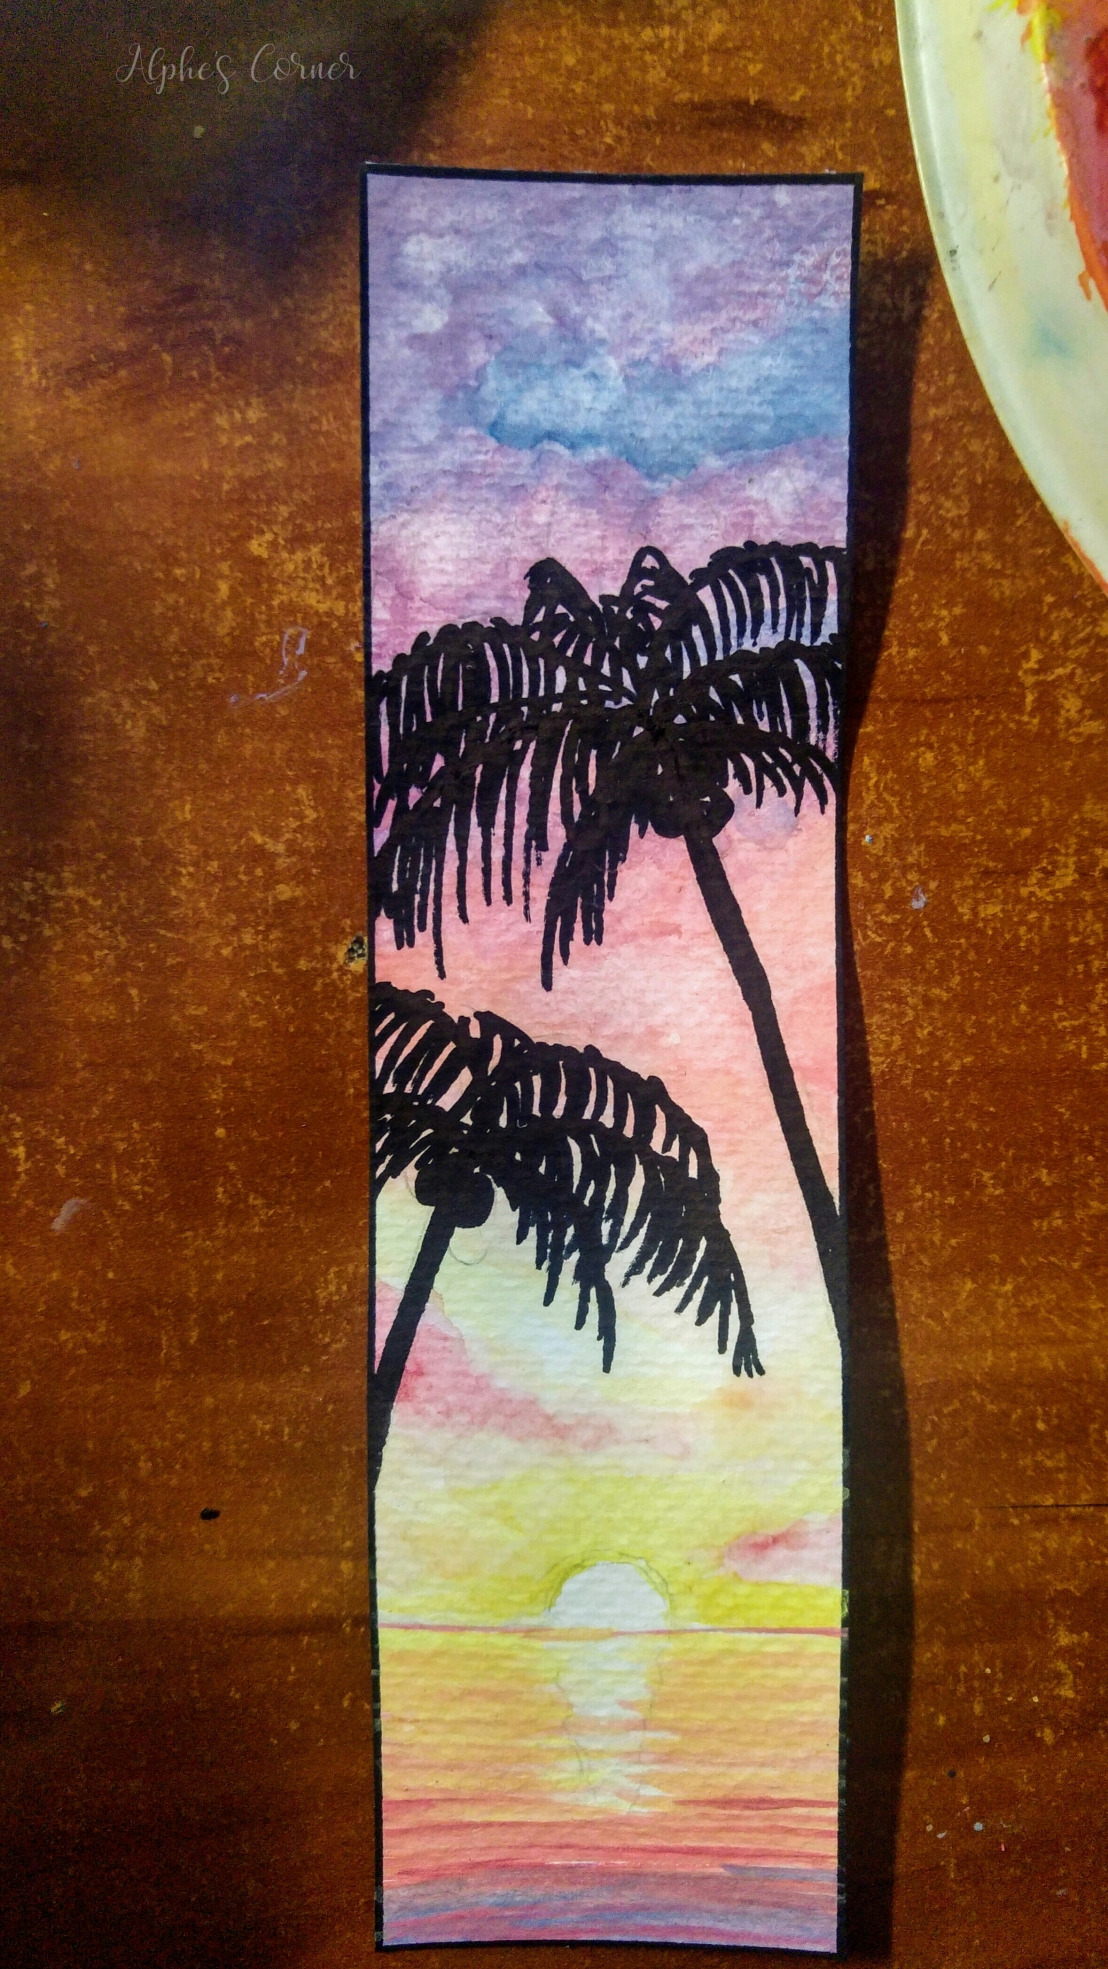 A watercolour bookmark - sunset, palm trees and the sea - completed